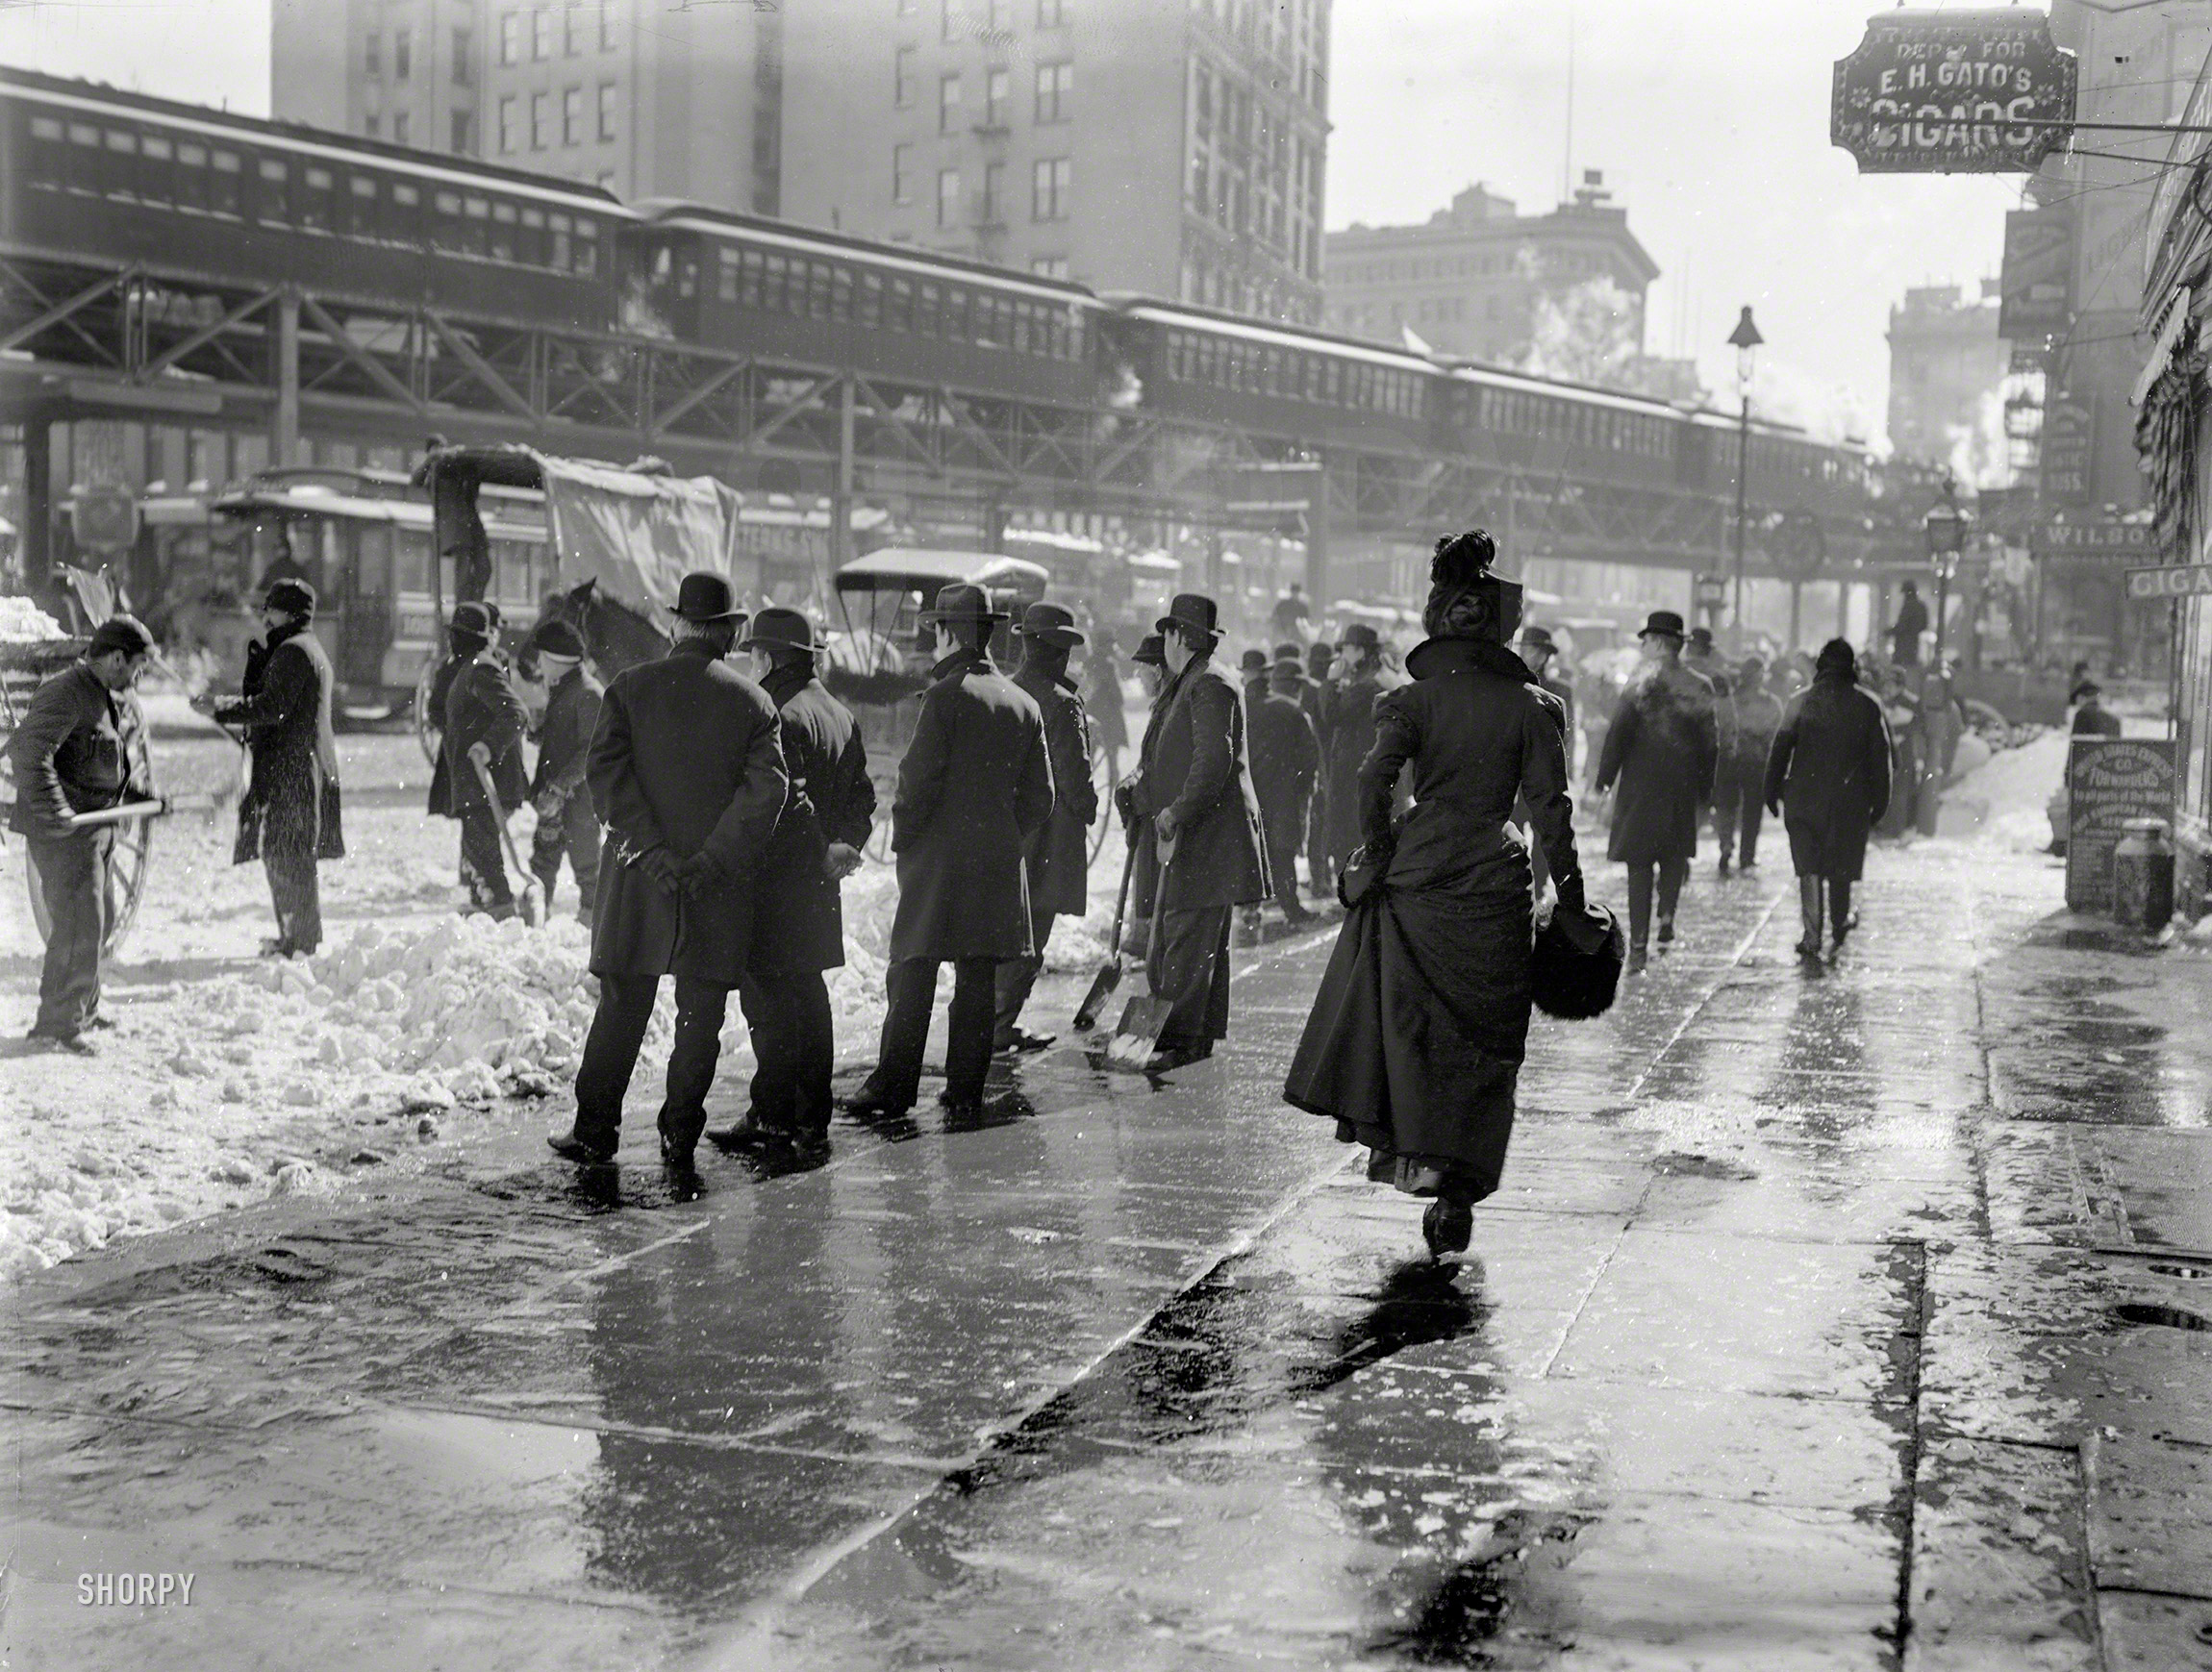 1899. "Blizzard '99 -- On the streets after a New York blizzard." 8x10 glass negative by Byron. Detroit Publishing Company. View full size.